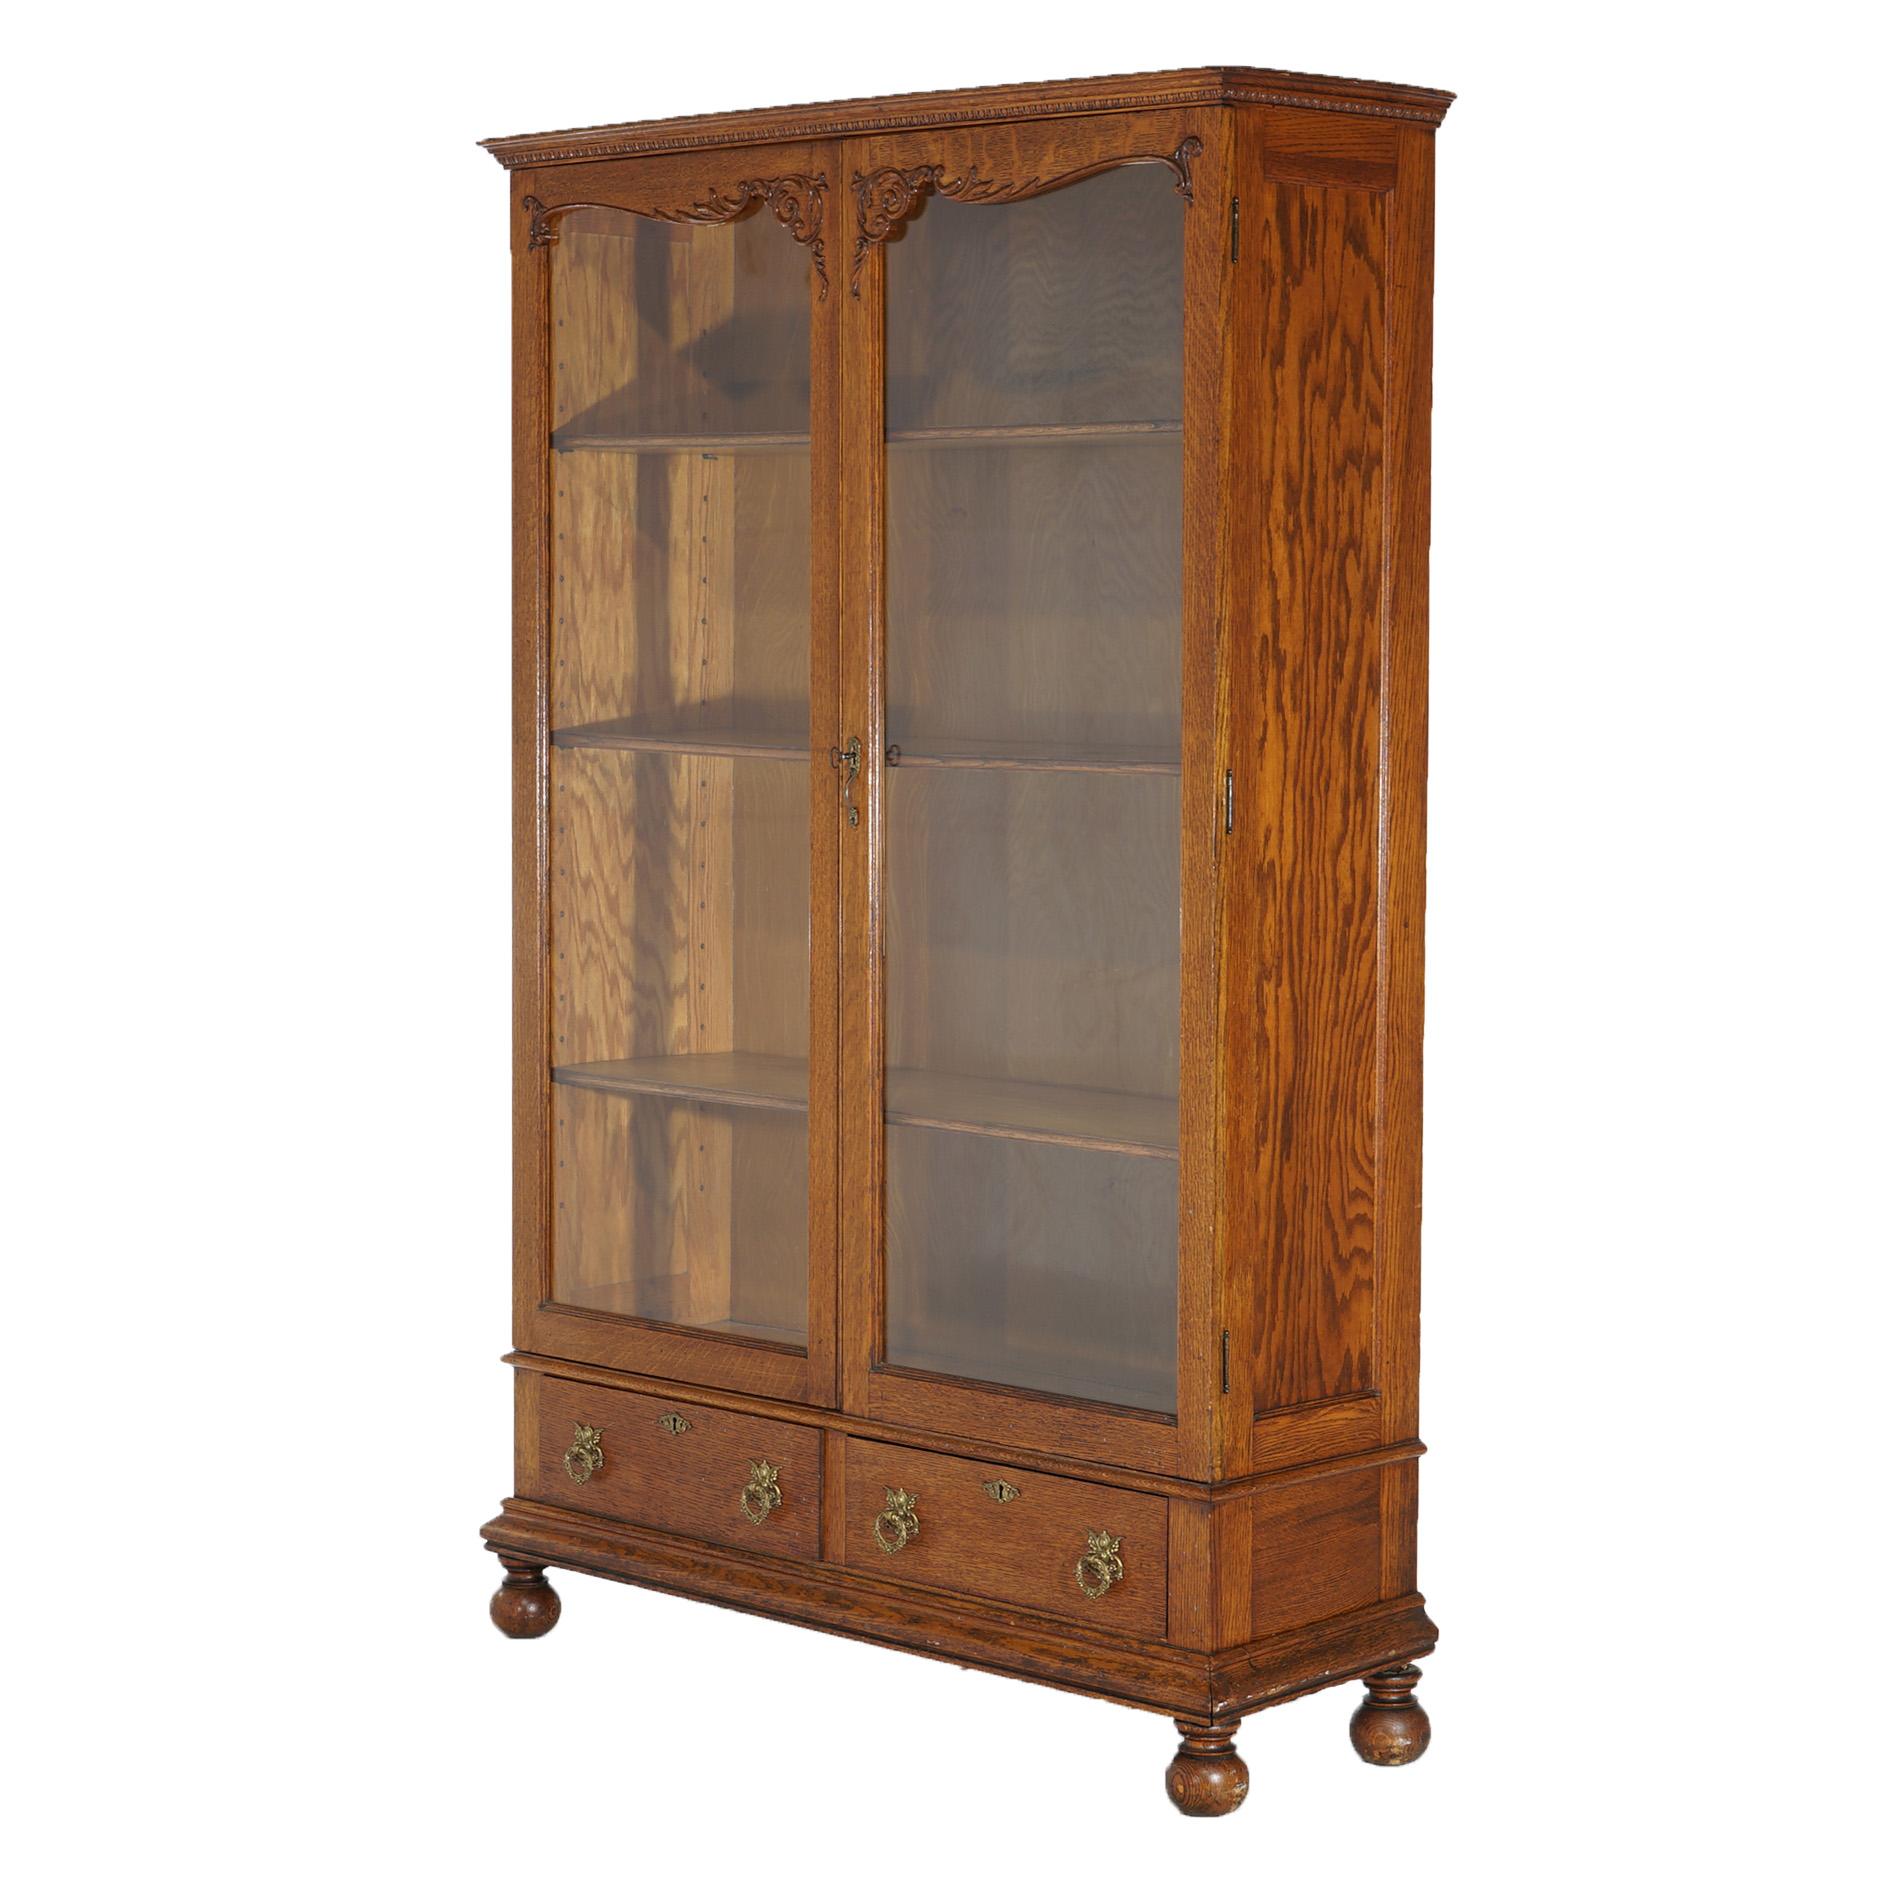 An antique bookcase by Skandia and in the manner of RJ Horner offers quarter sawn oak construction with double glass doors having carved foliate elements and opening to a shelved interior over two lower drawers, and raised on bun feet, en verso